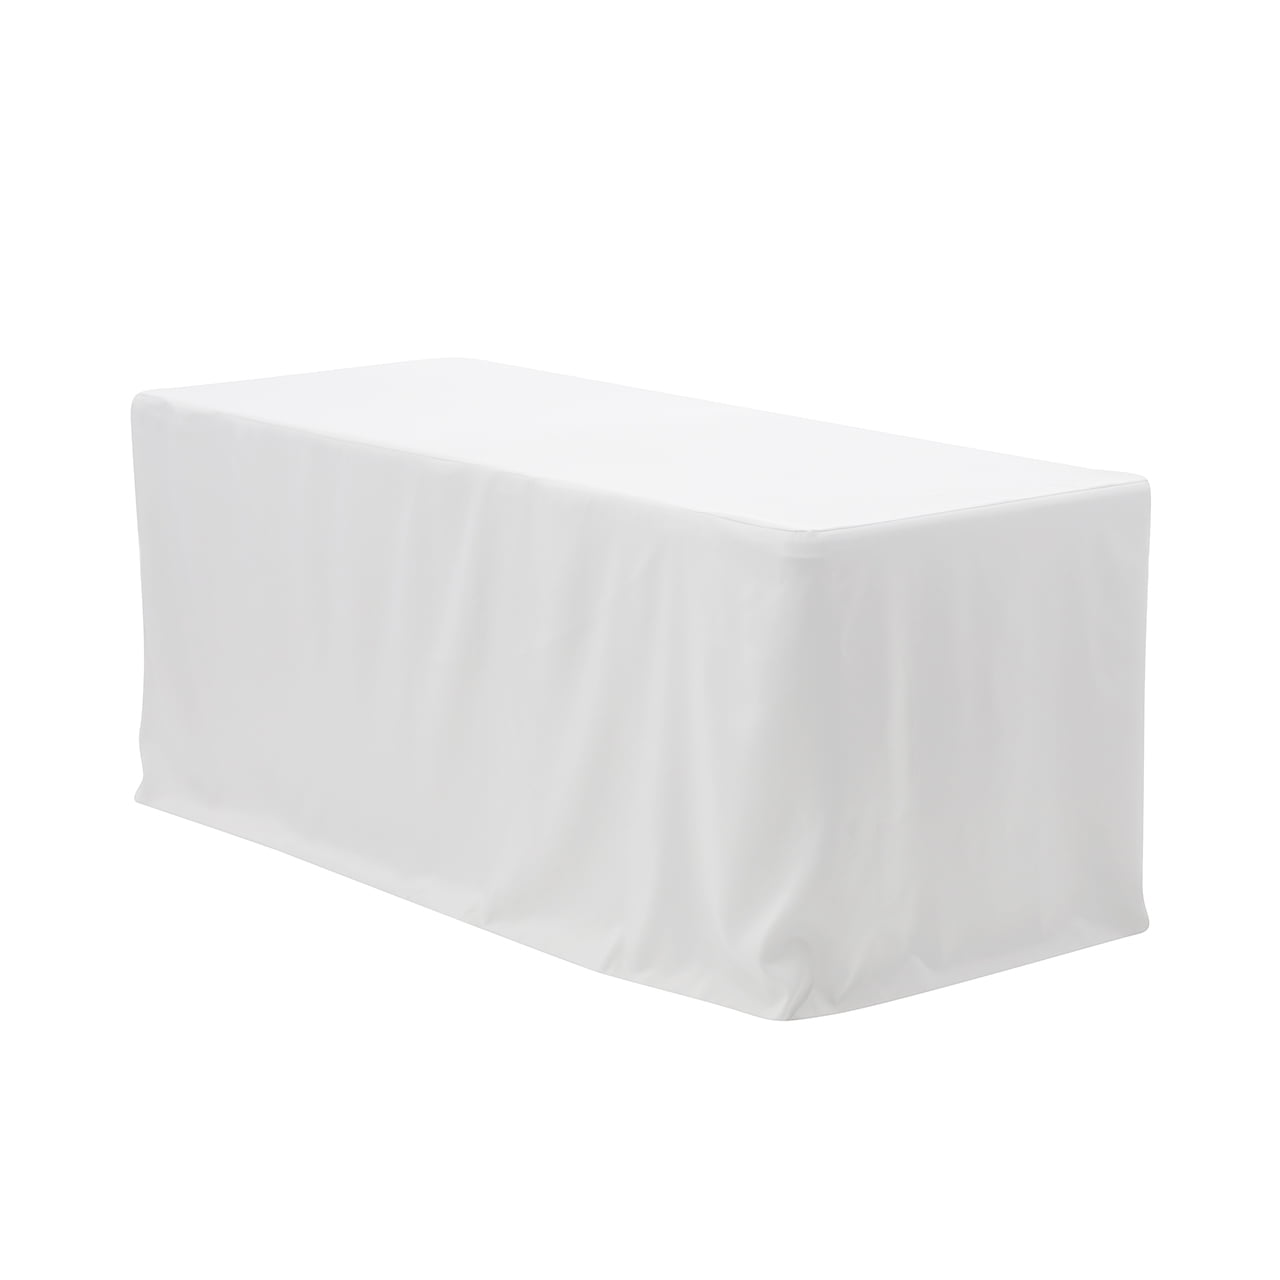 6 Ft Fitted Polyester Tablecloth, What Size Tablecloth For A 6 Foot Banquet Table